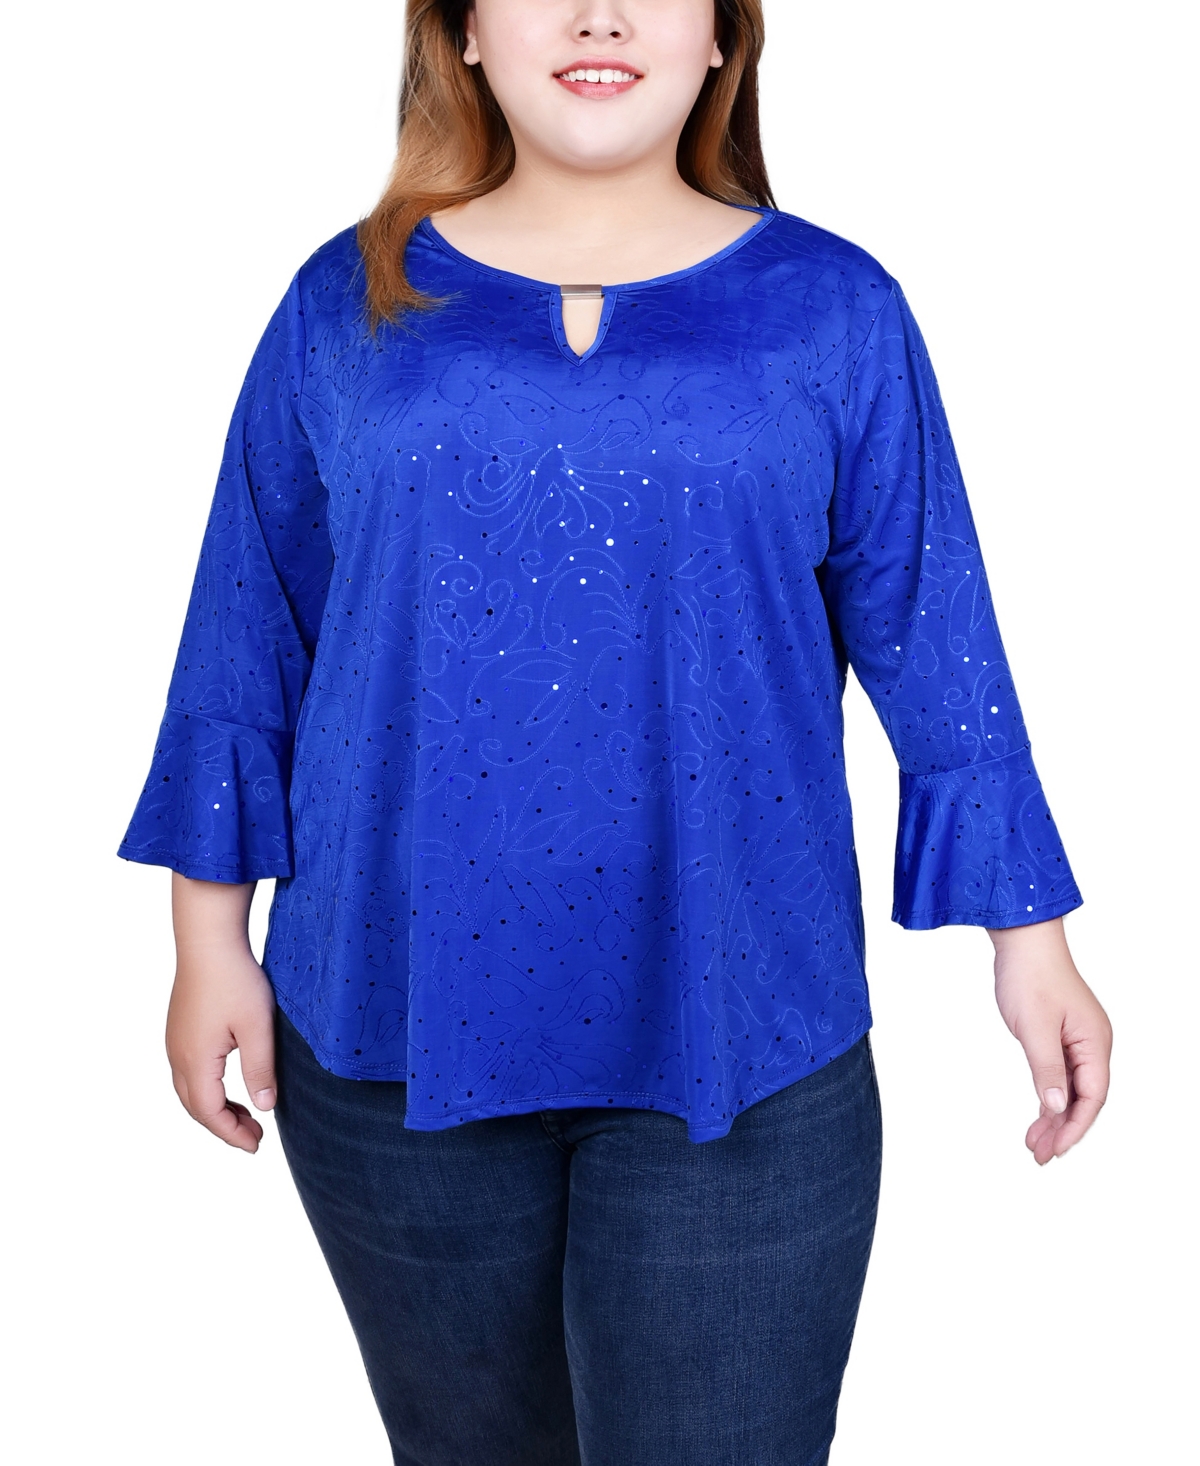 Plus Size 3/4 Bell Sleeve Top with Hardware - Royal